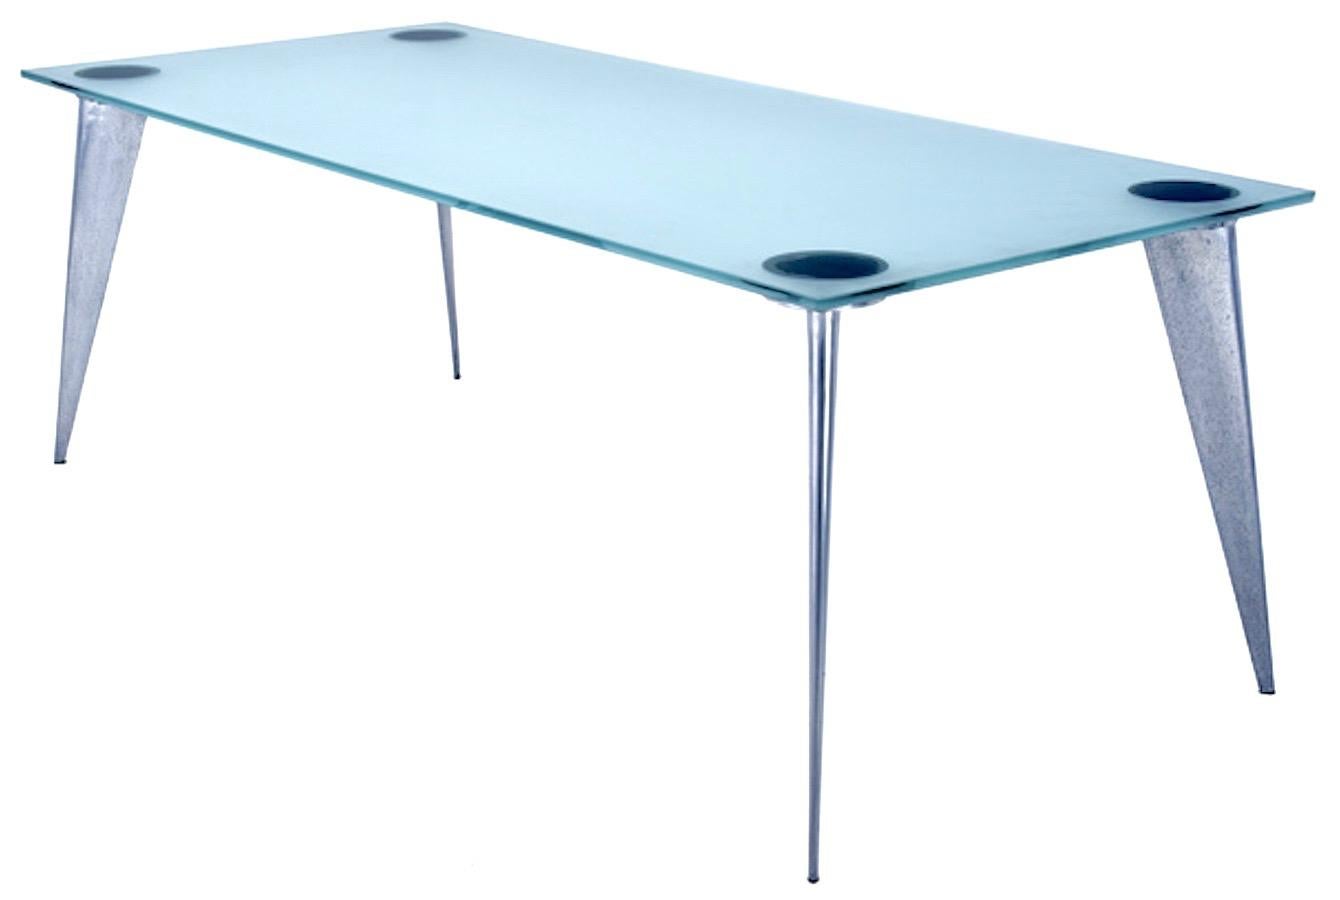 Philippe Starck (série lang) modernist dining table for Driade/aleph, circa 1985. Manufactured by Driade/Aleph. Dining table having a frosted glass top raised on cast aluminum tapering splayed legs. Legs marked 